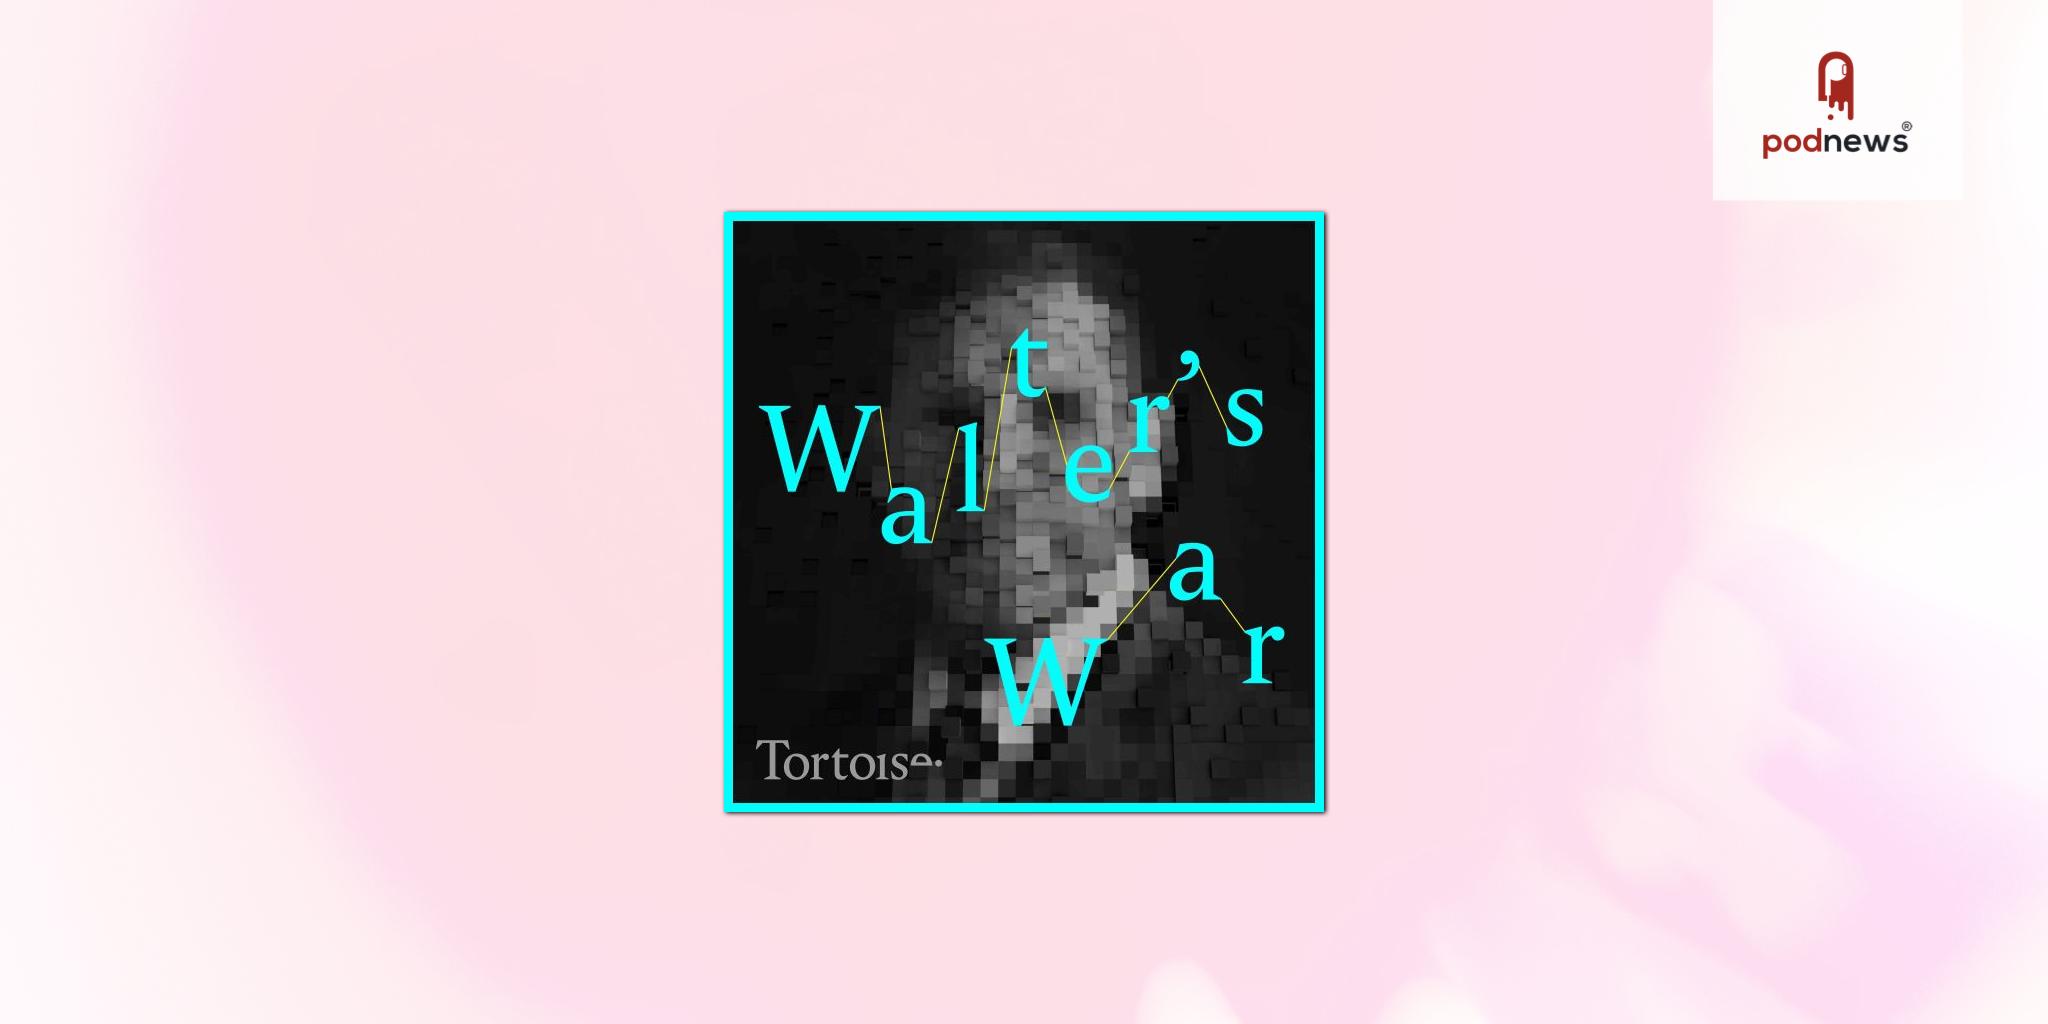 Tortoise Media launches latest podcast series, Walter's War - a journey through hype and national security